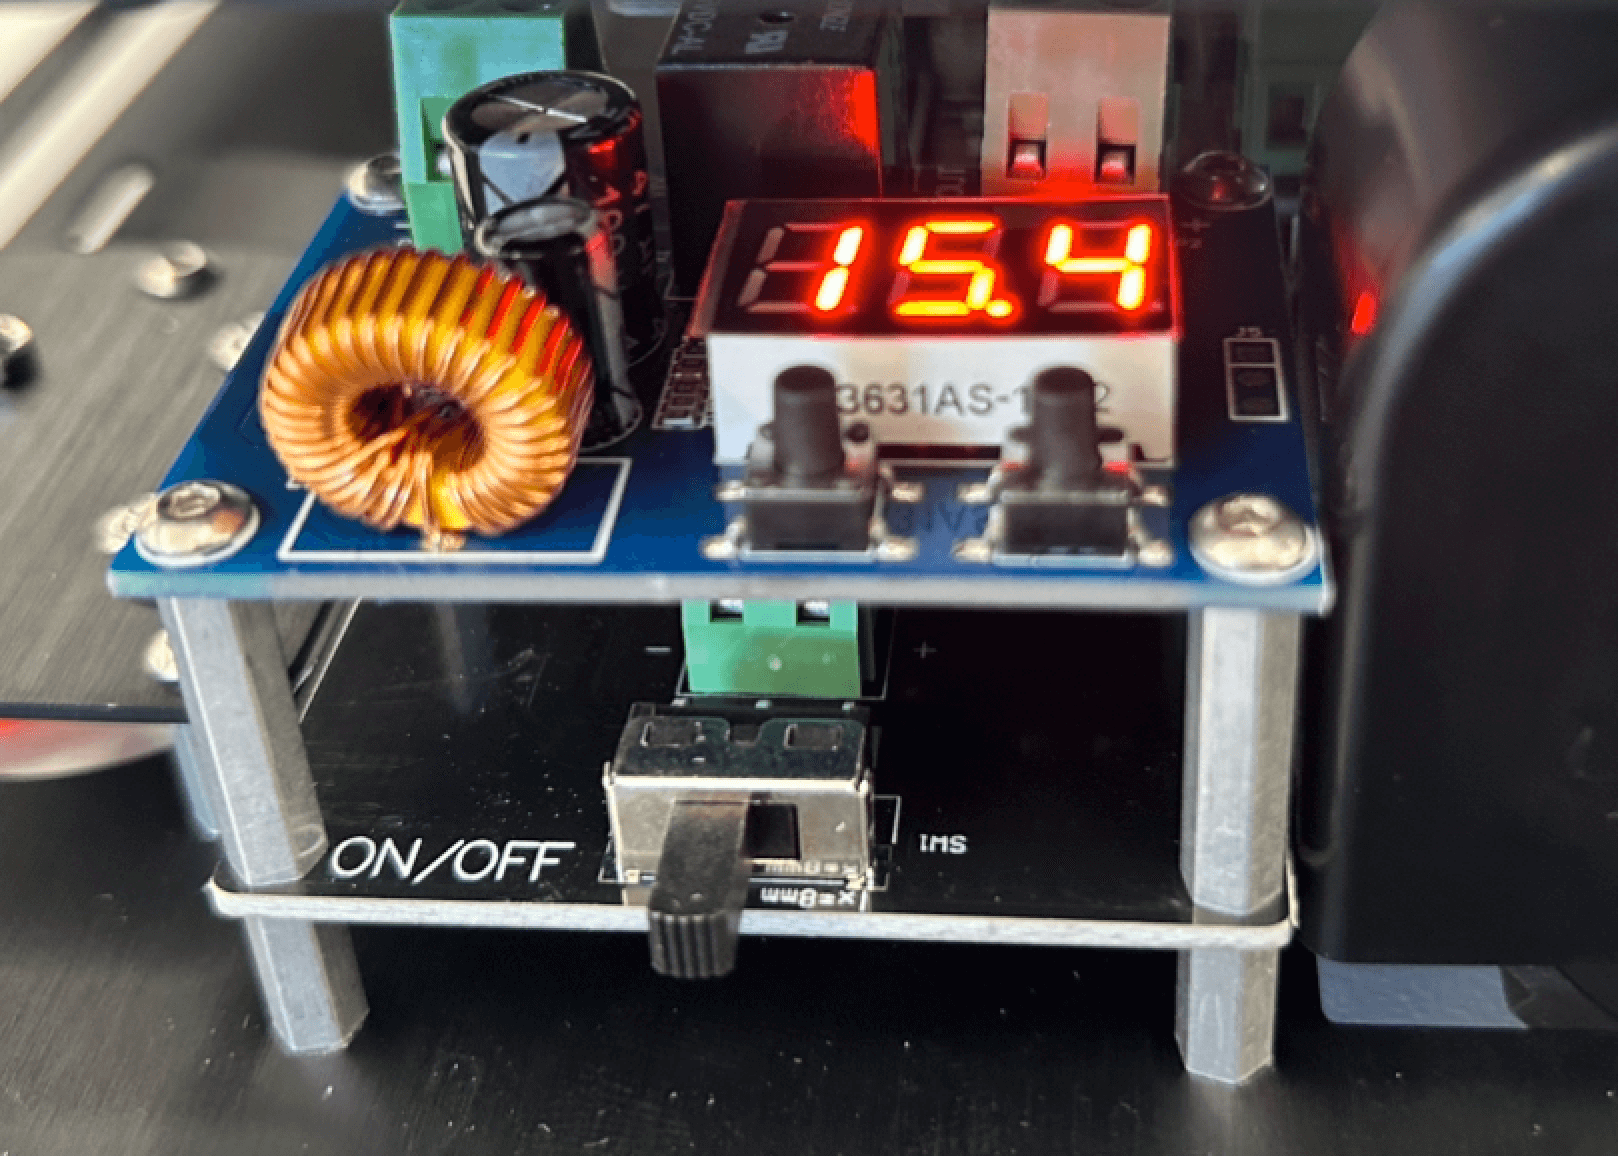 LED with voltage level displayed on low voltage cutoff circuit